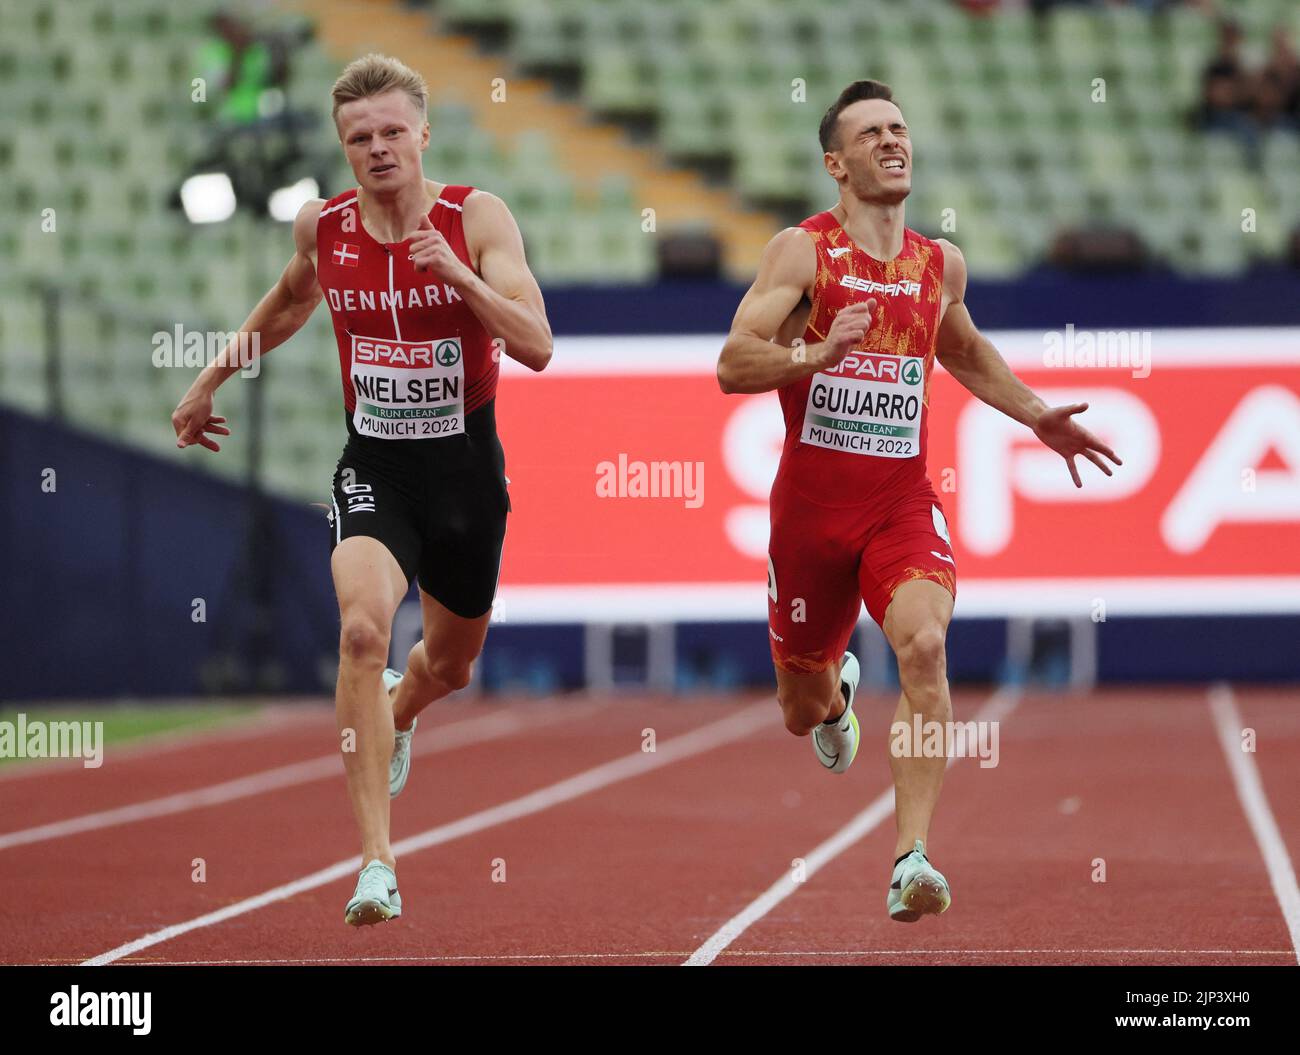 Athletics - 2022 European Championships - Olympiastadion, Munich, Germany - August 15, 2022 Denamrk's Gustav Lundholm Nielsen and Spain's Manuel Guijarro in action during the Men's 400m Round 1 Heat 4 REUTERS/Wolfgang Rattay Stock Photo